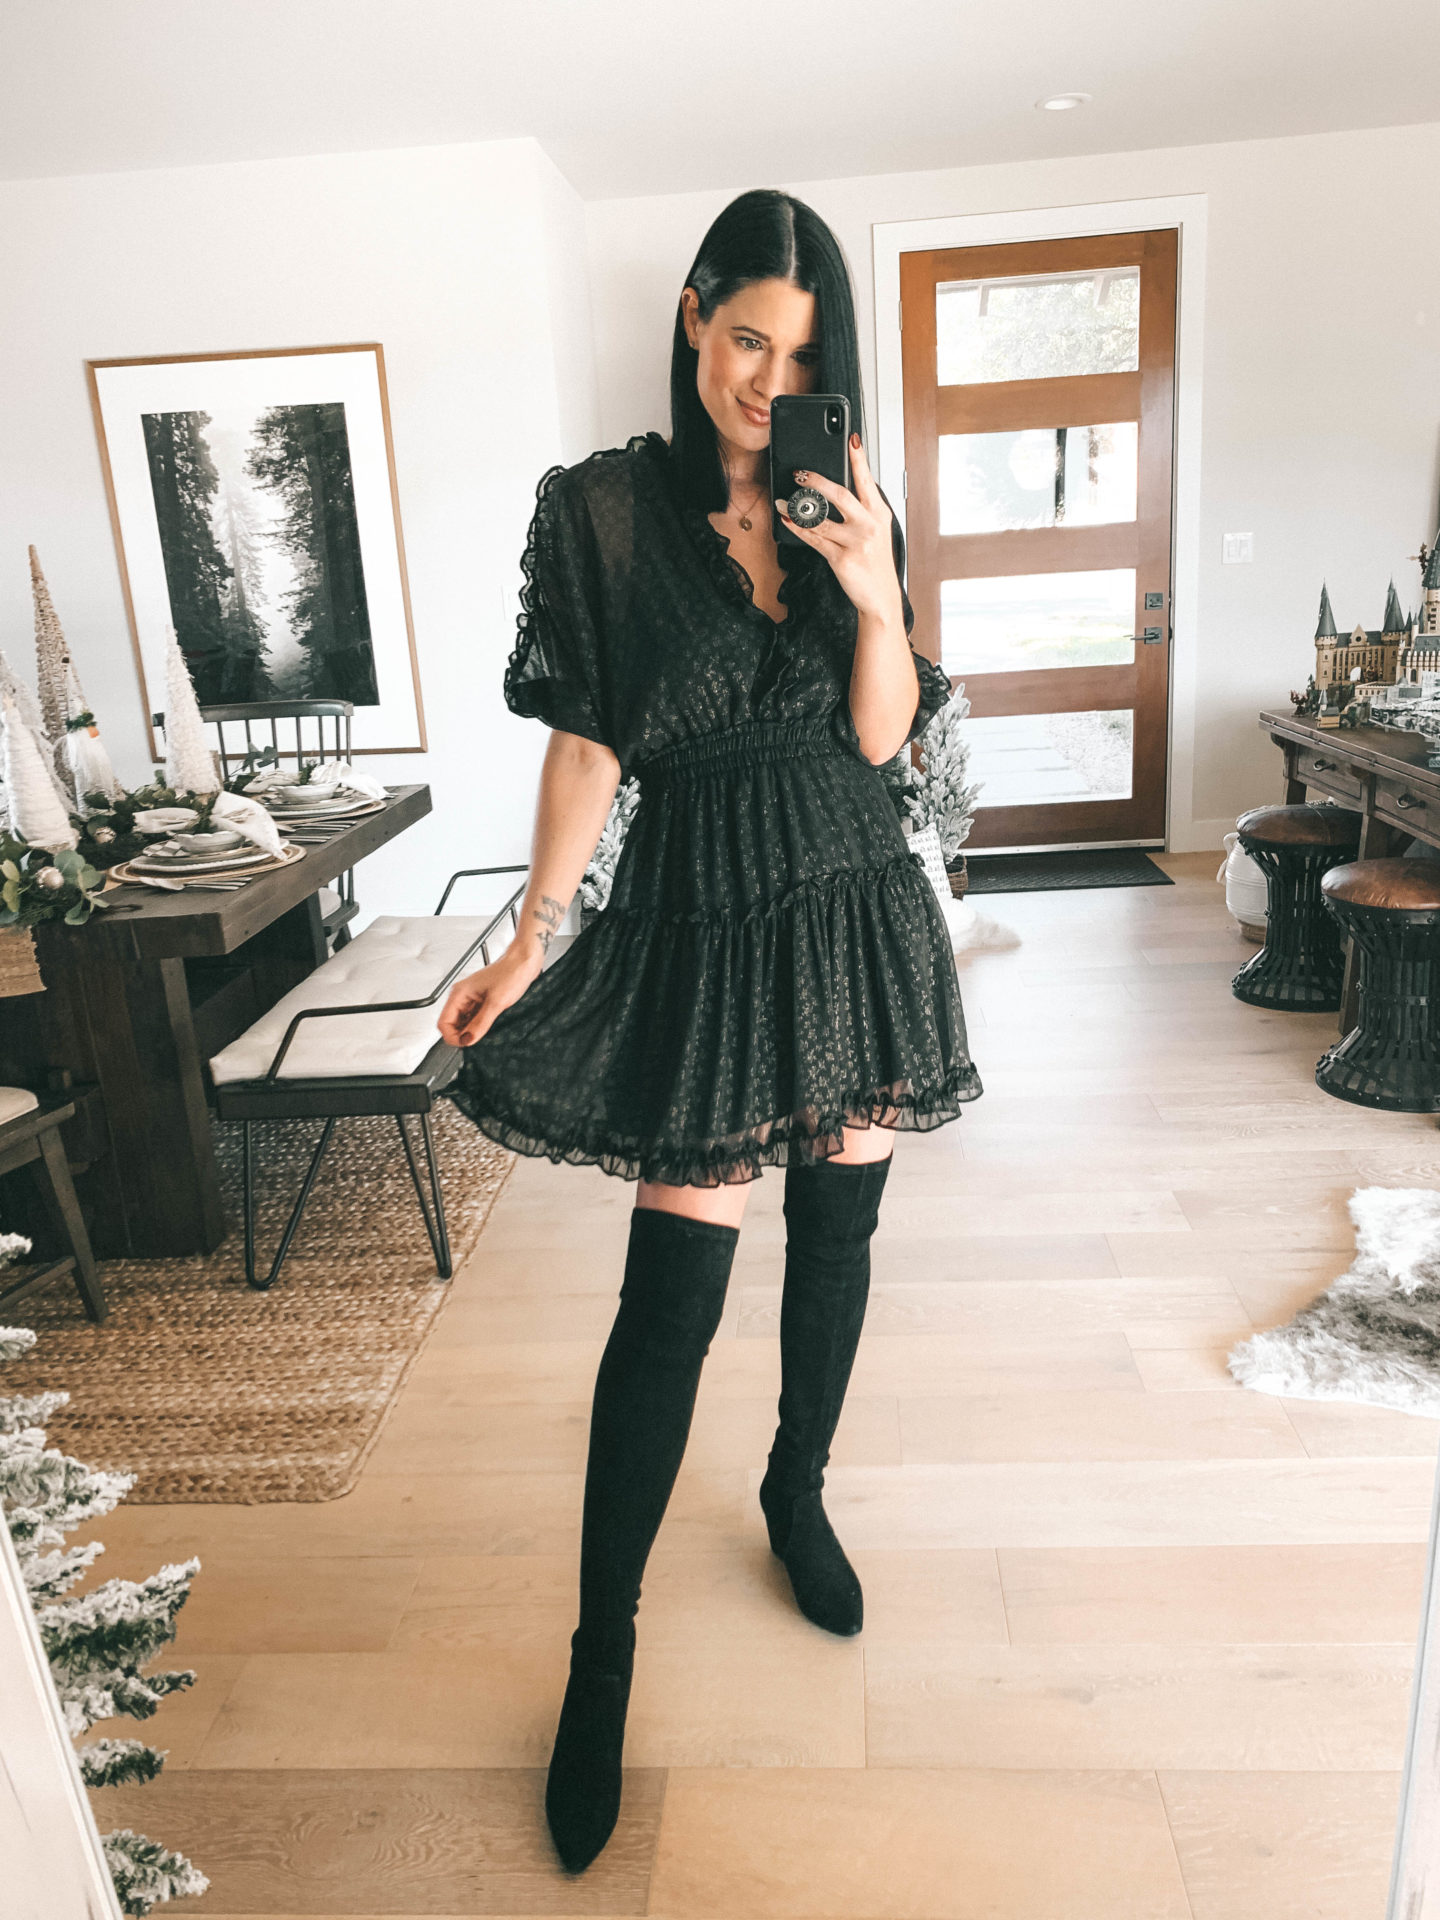 Lovestitch Holiday Favorites Try-On Session by popular Austin fashion blog, Dressed to Kill: image of a woman wearing a Lovestitch Rania Foil Chiffon Dress.